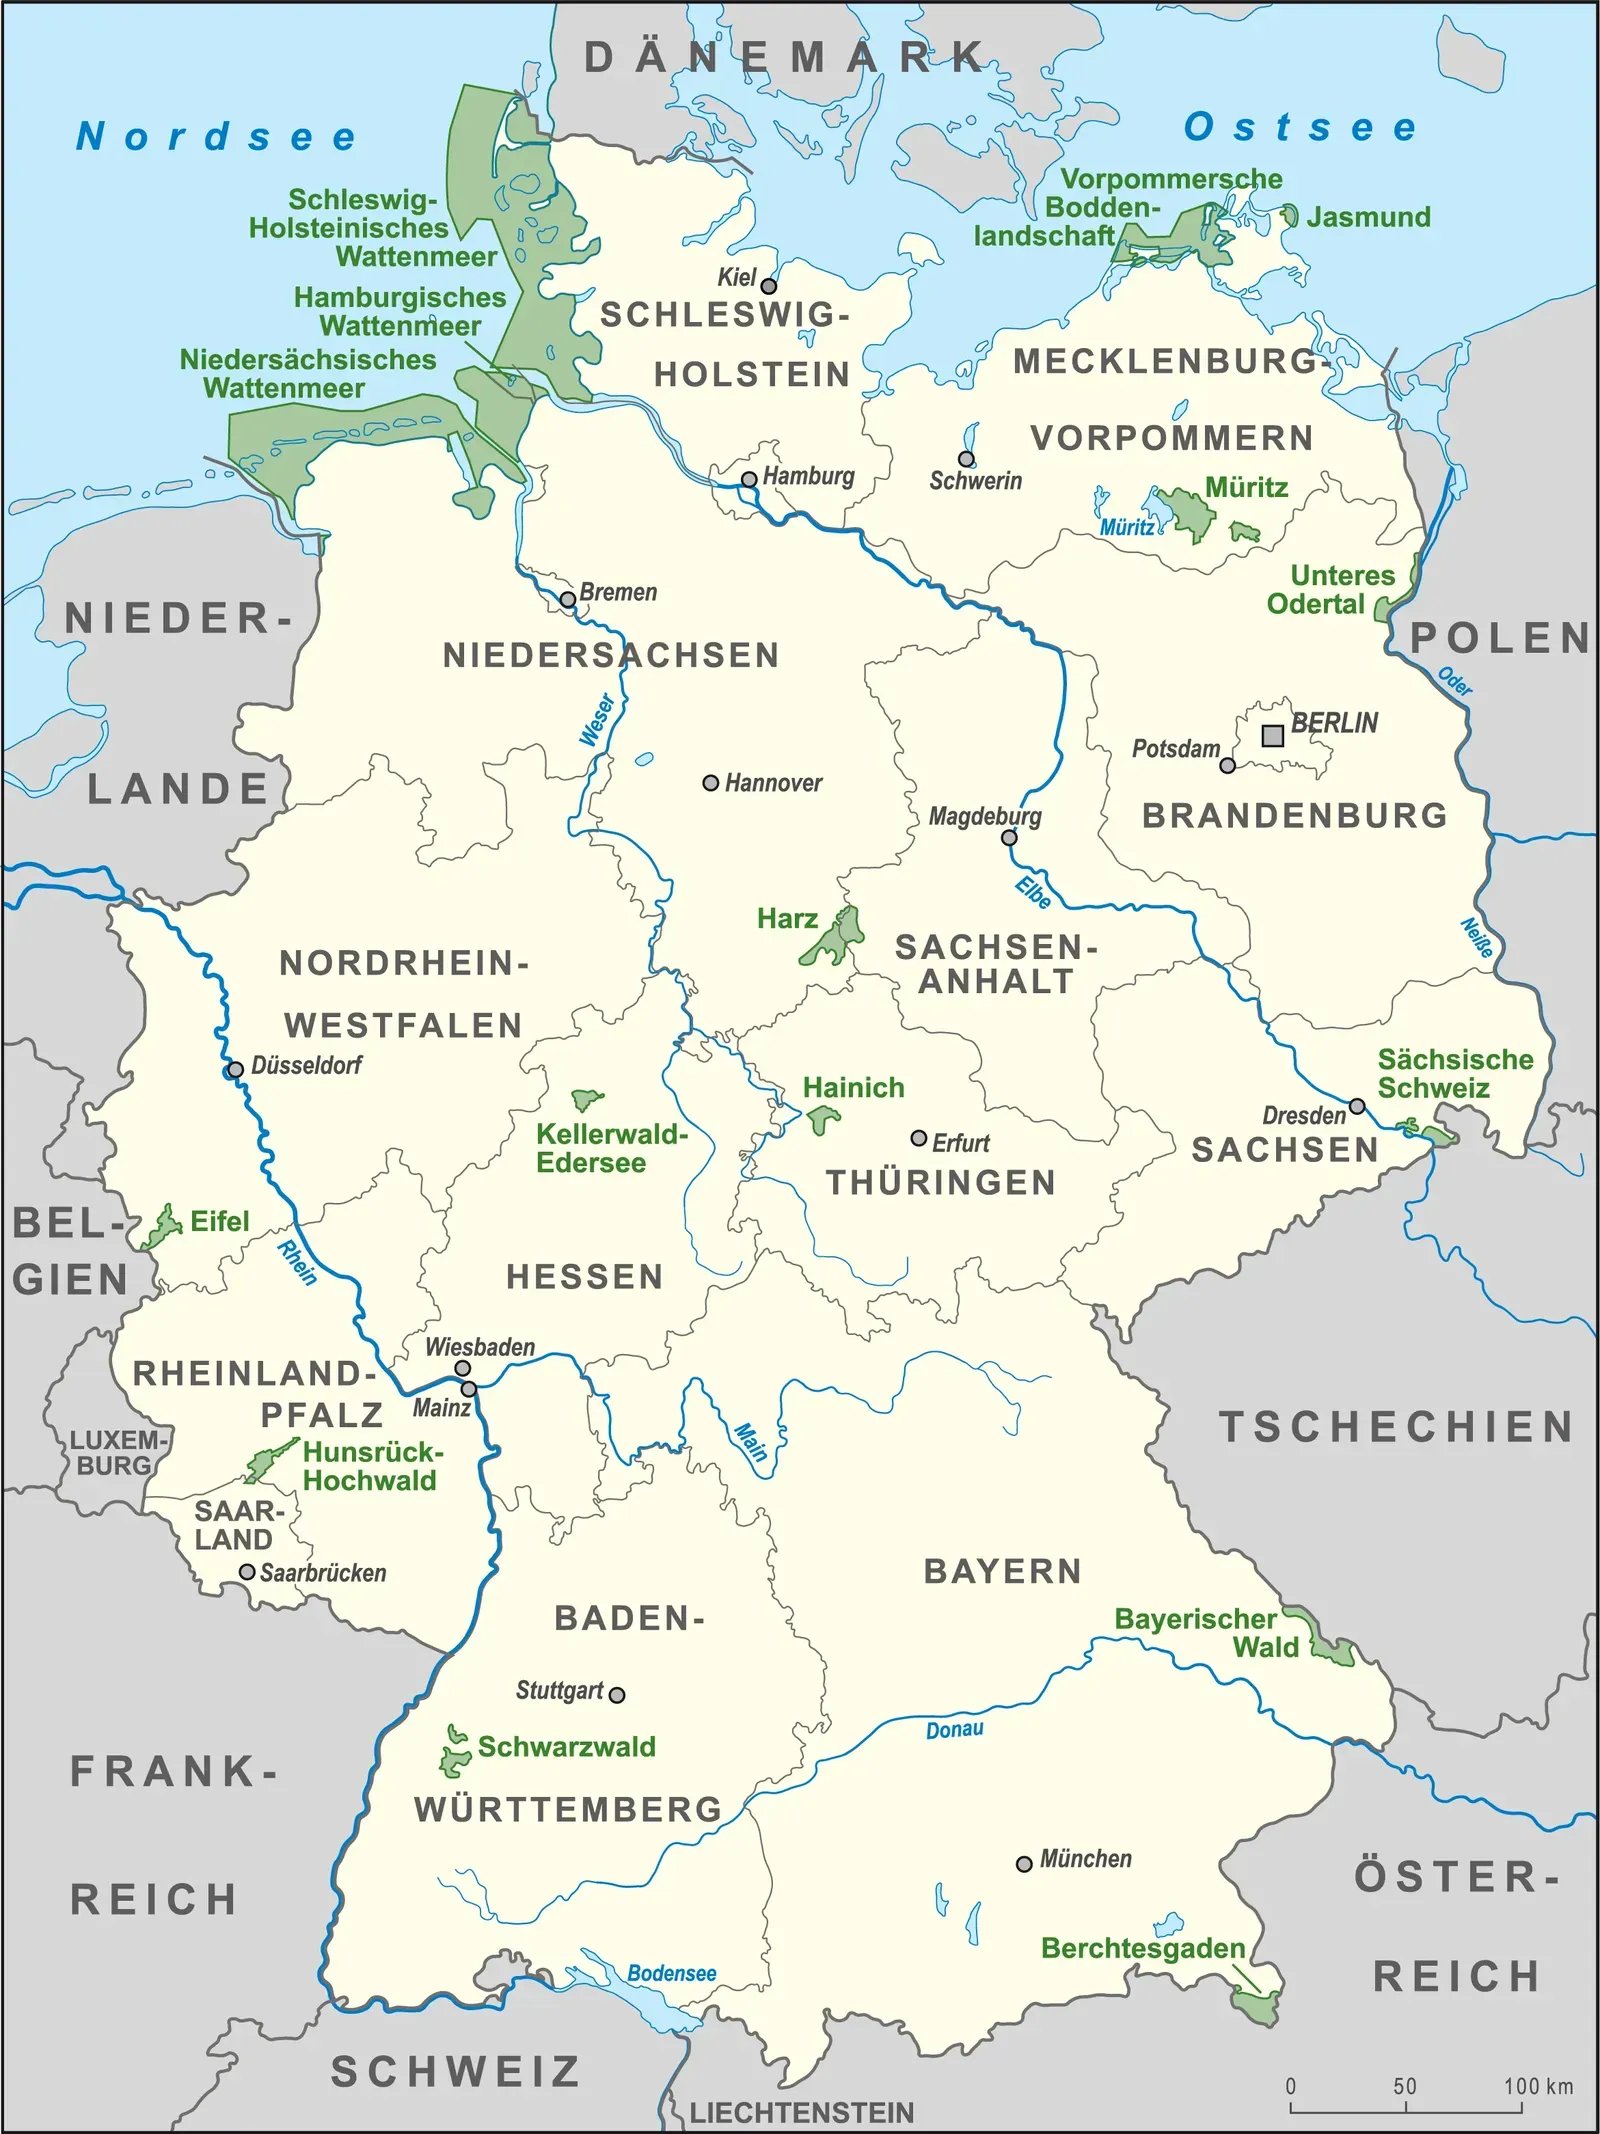 16 National Parks of Germany - With maps and photos